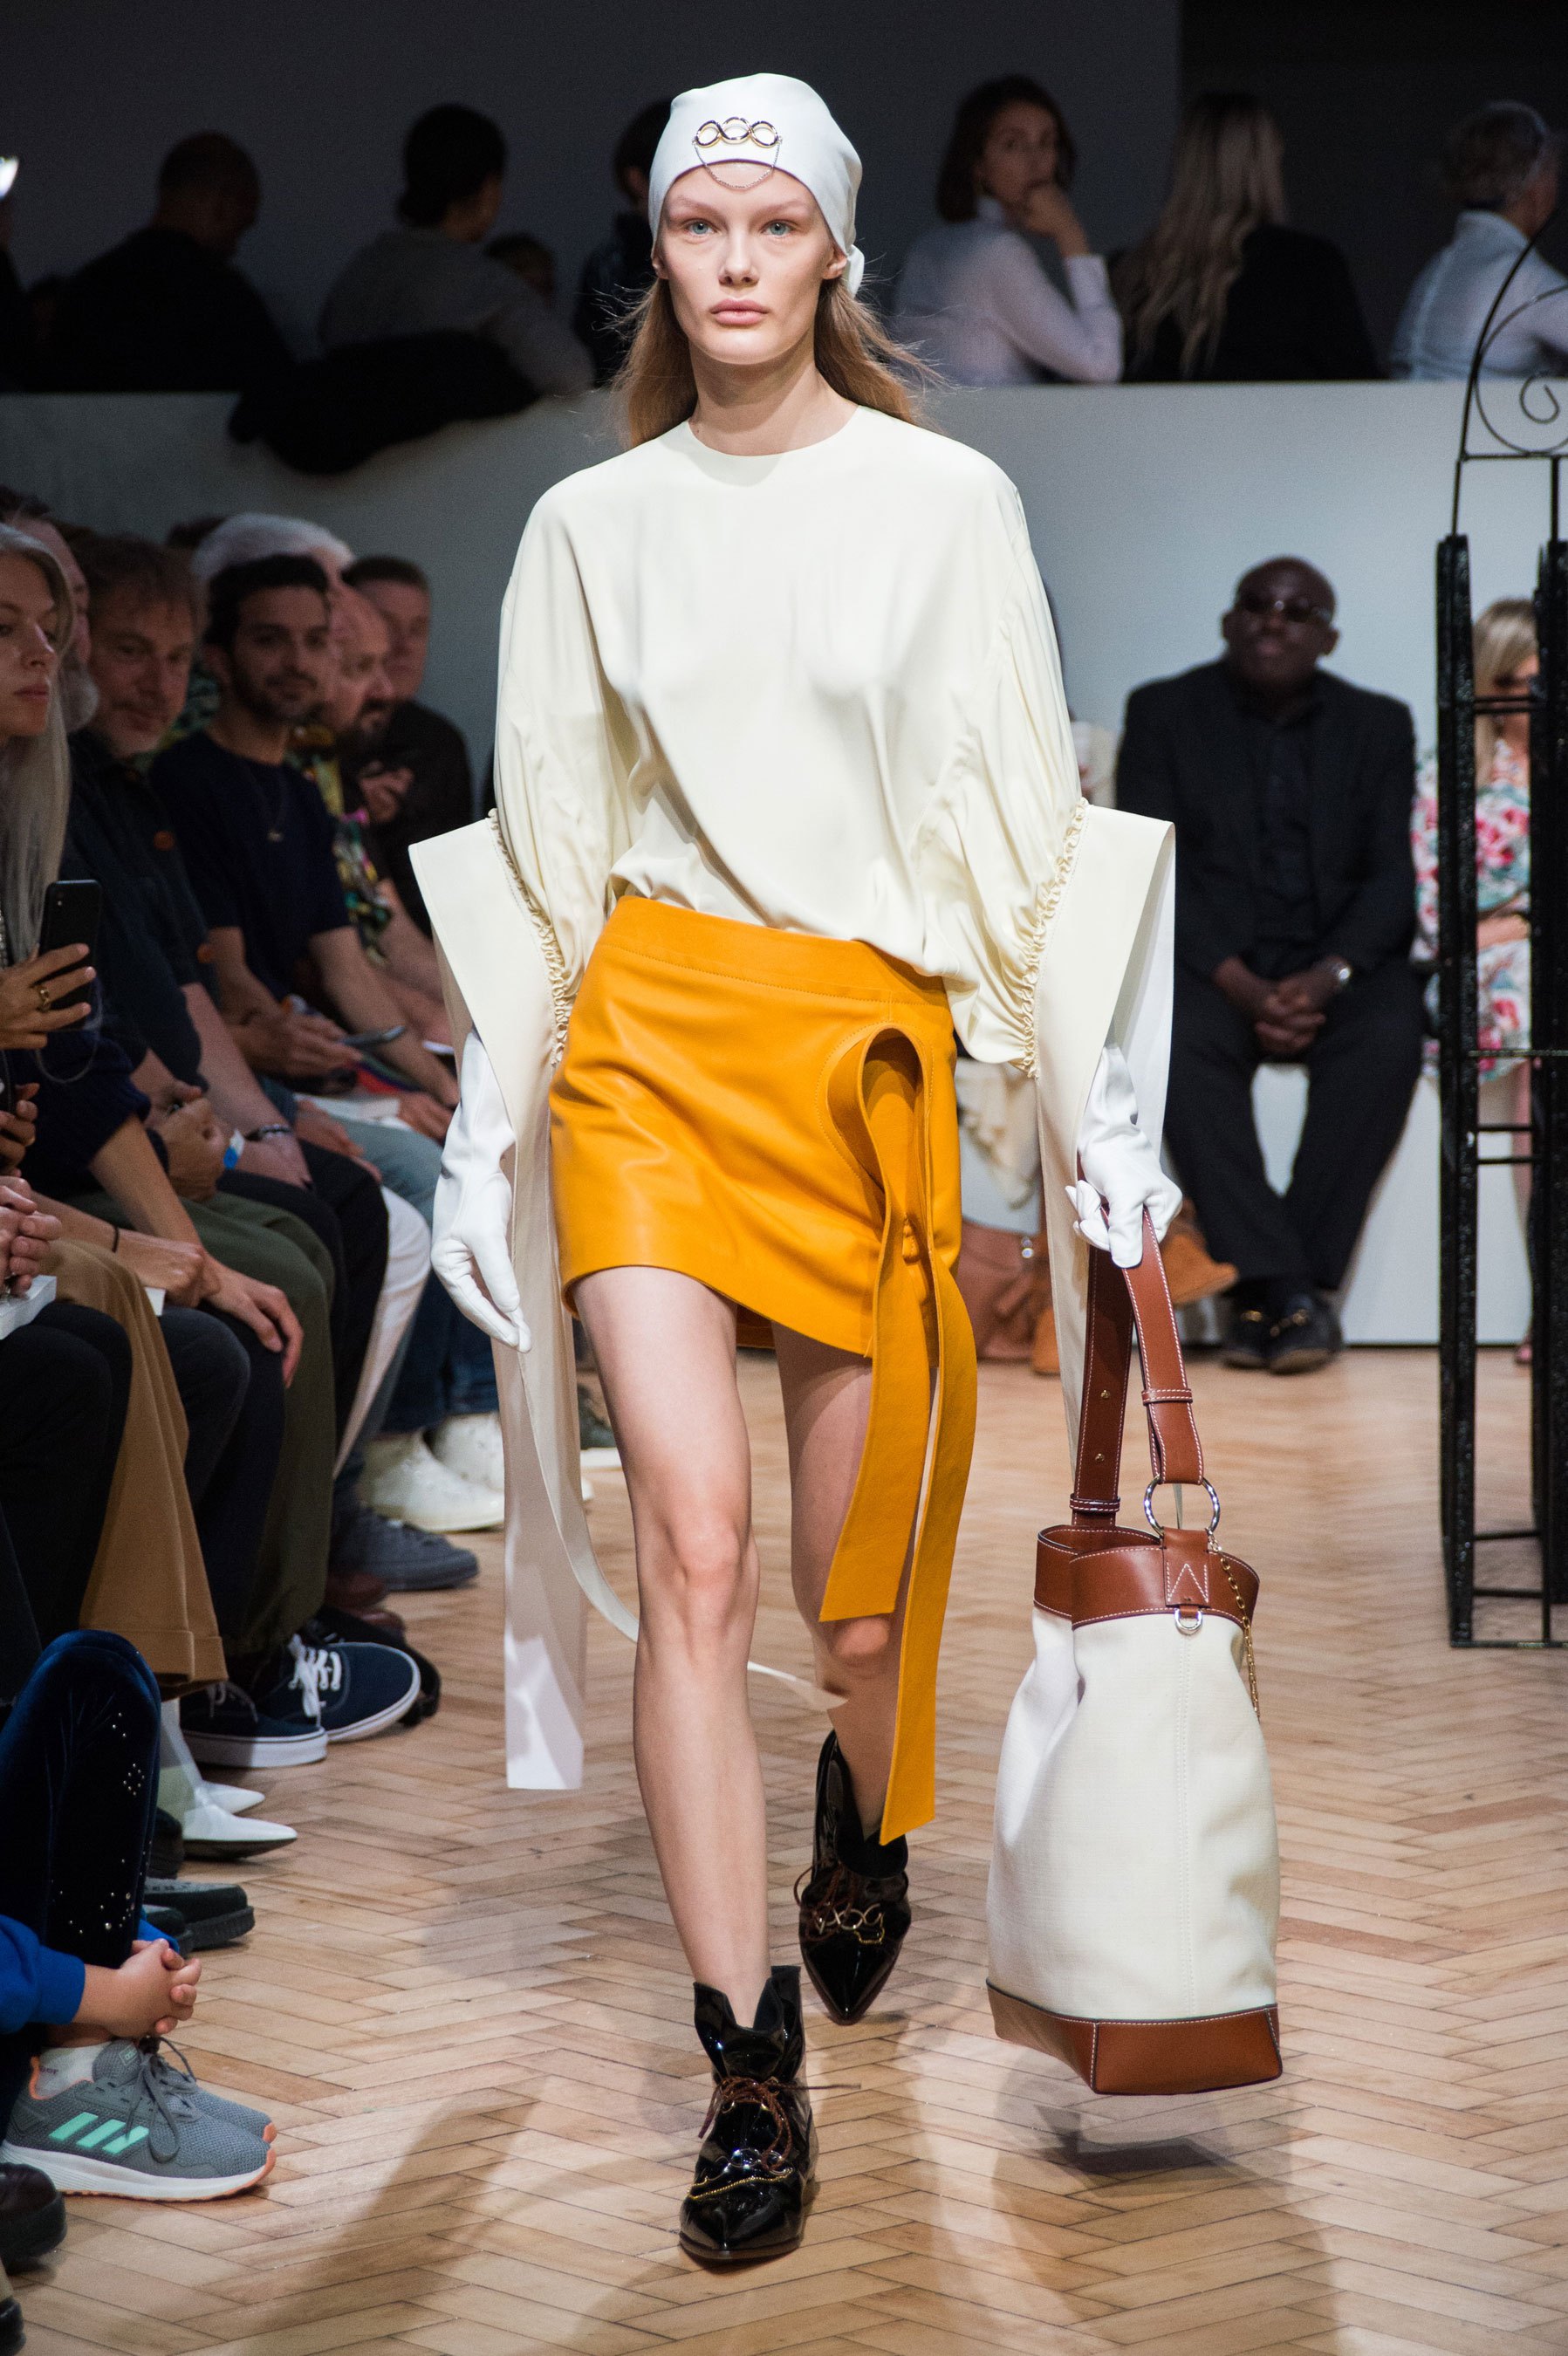 Top 10 London Spring 2019 Collections and Fashion Shows - The Impression